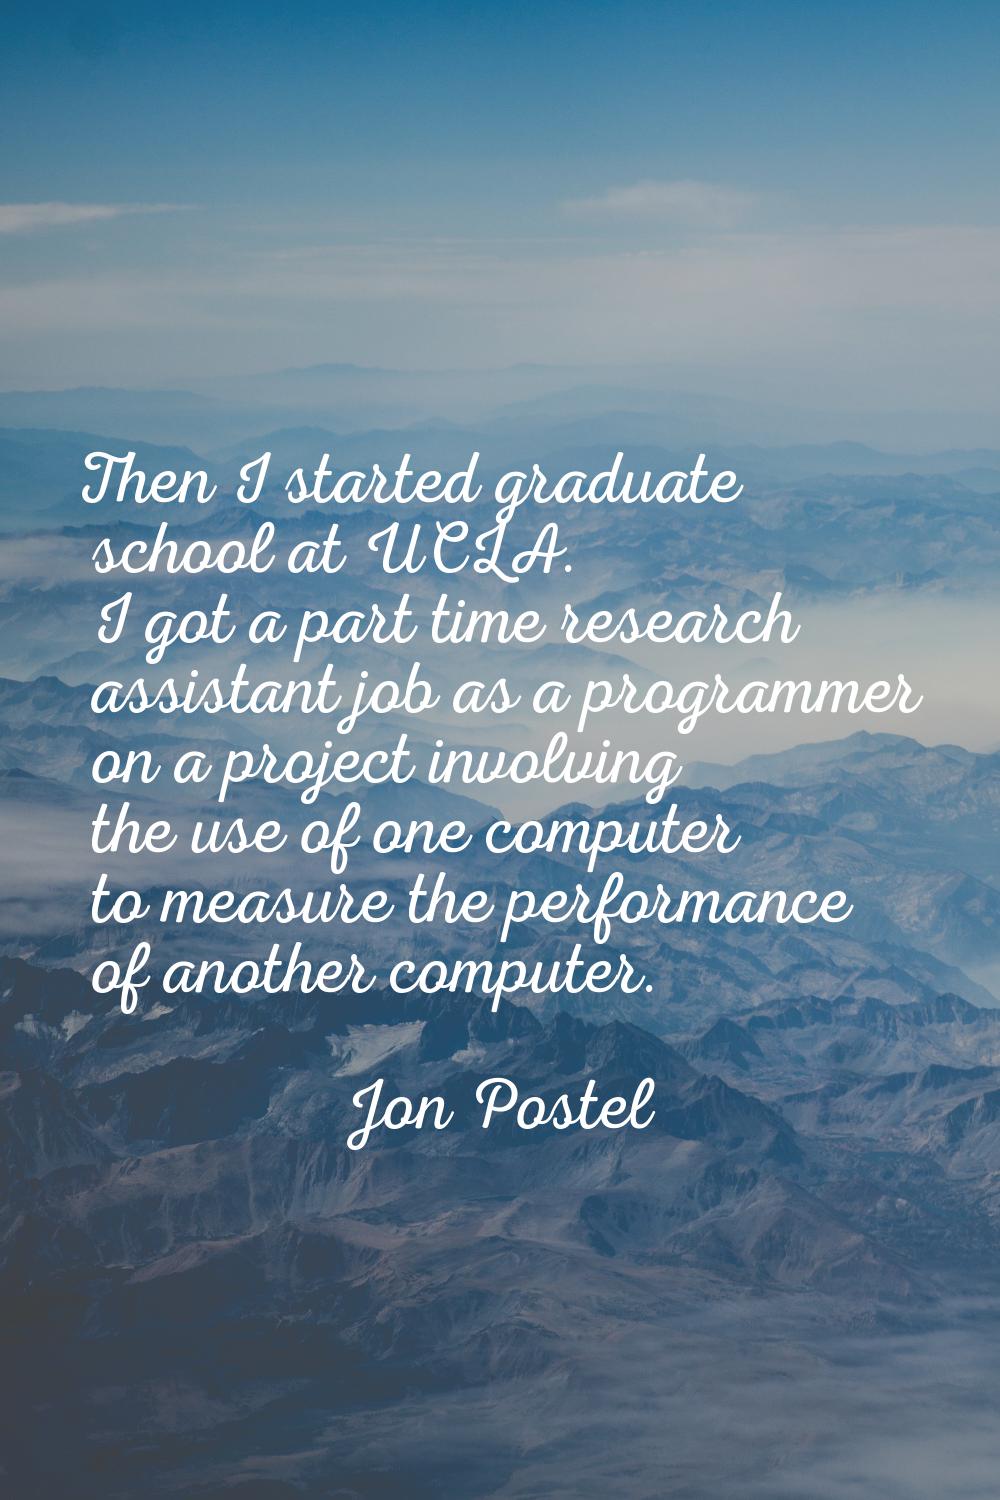 Then I started graduate school at UCLA. I got a part time research assistant job as a programmer on